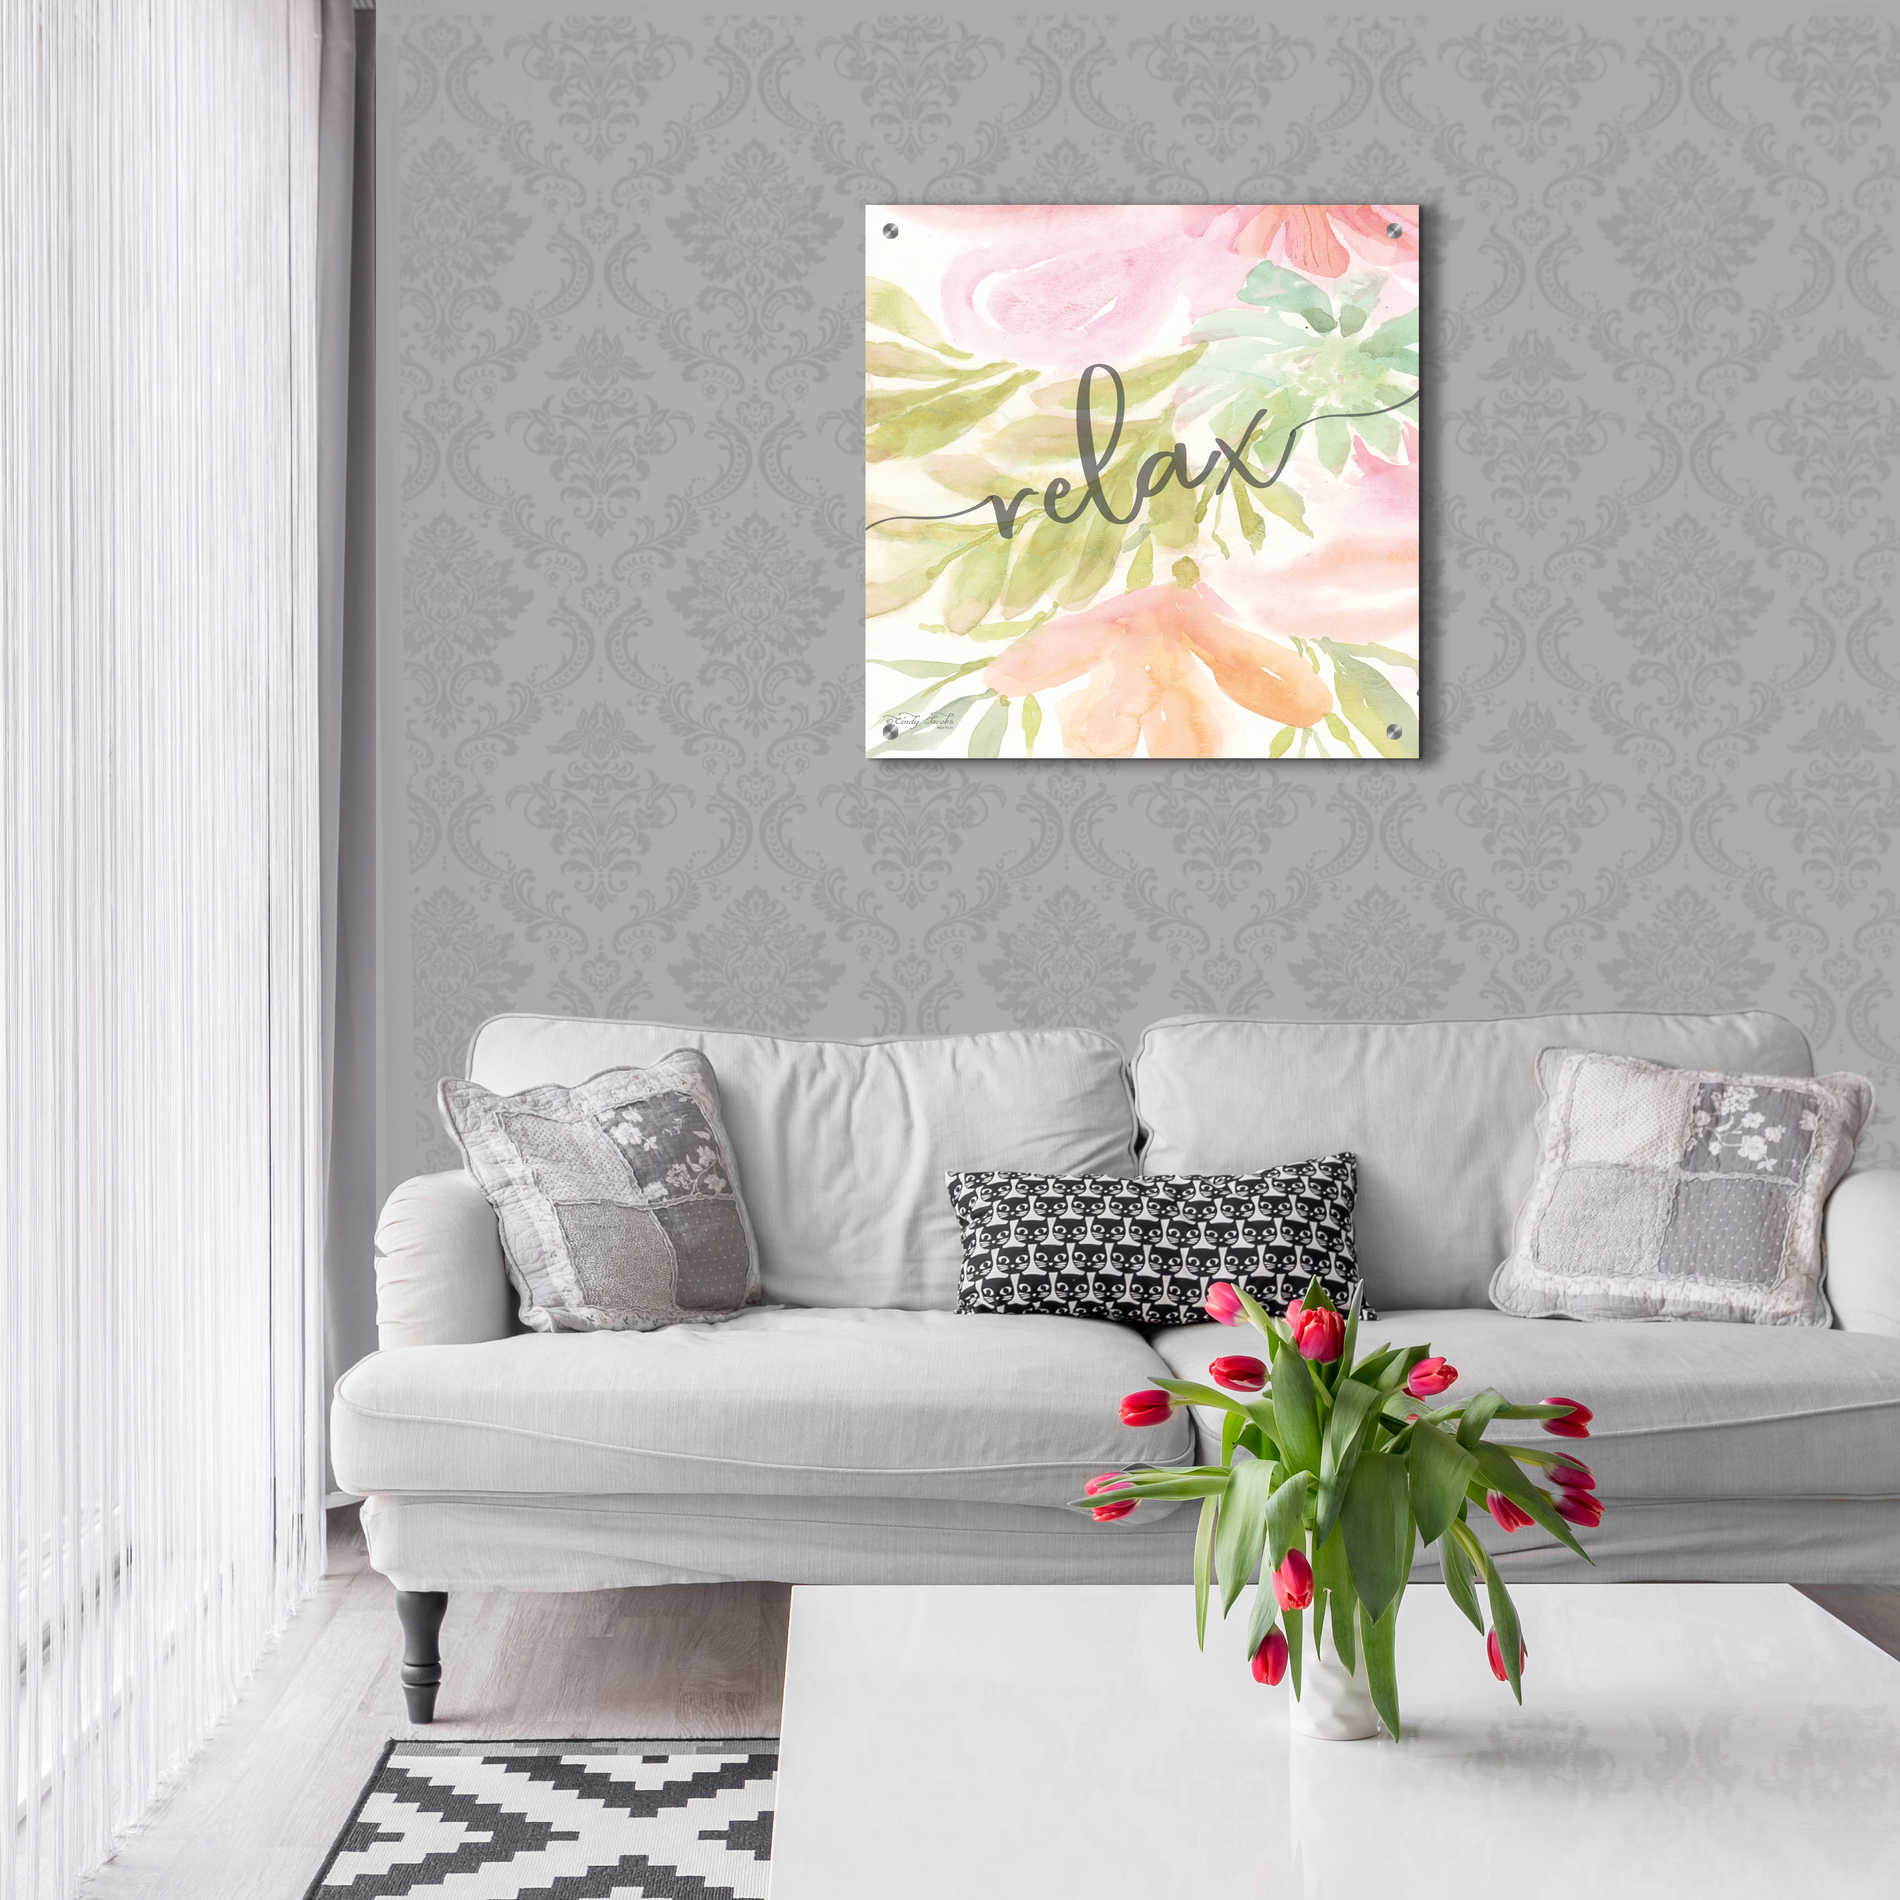 Epic Art 'Floral Relax' by Cindy Jacobs, Acrylic Glass Wall Art,24x24